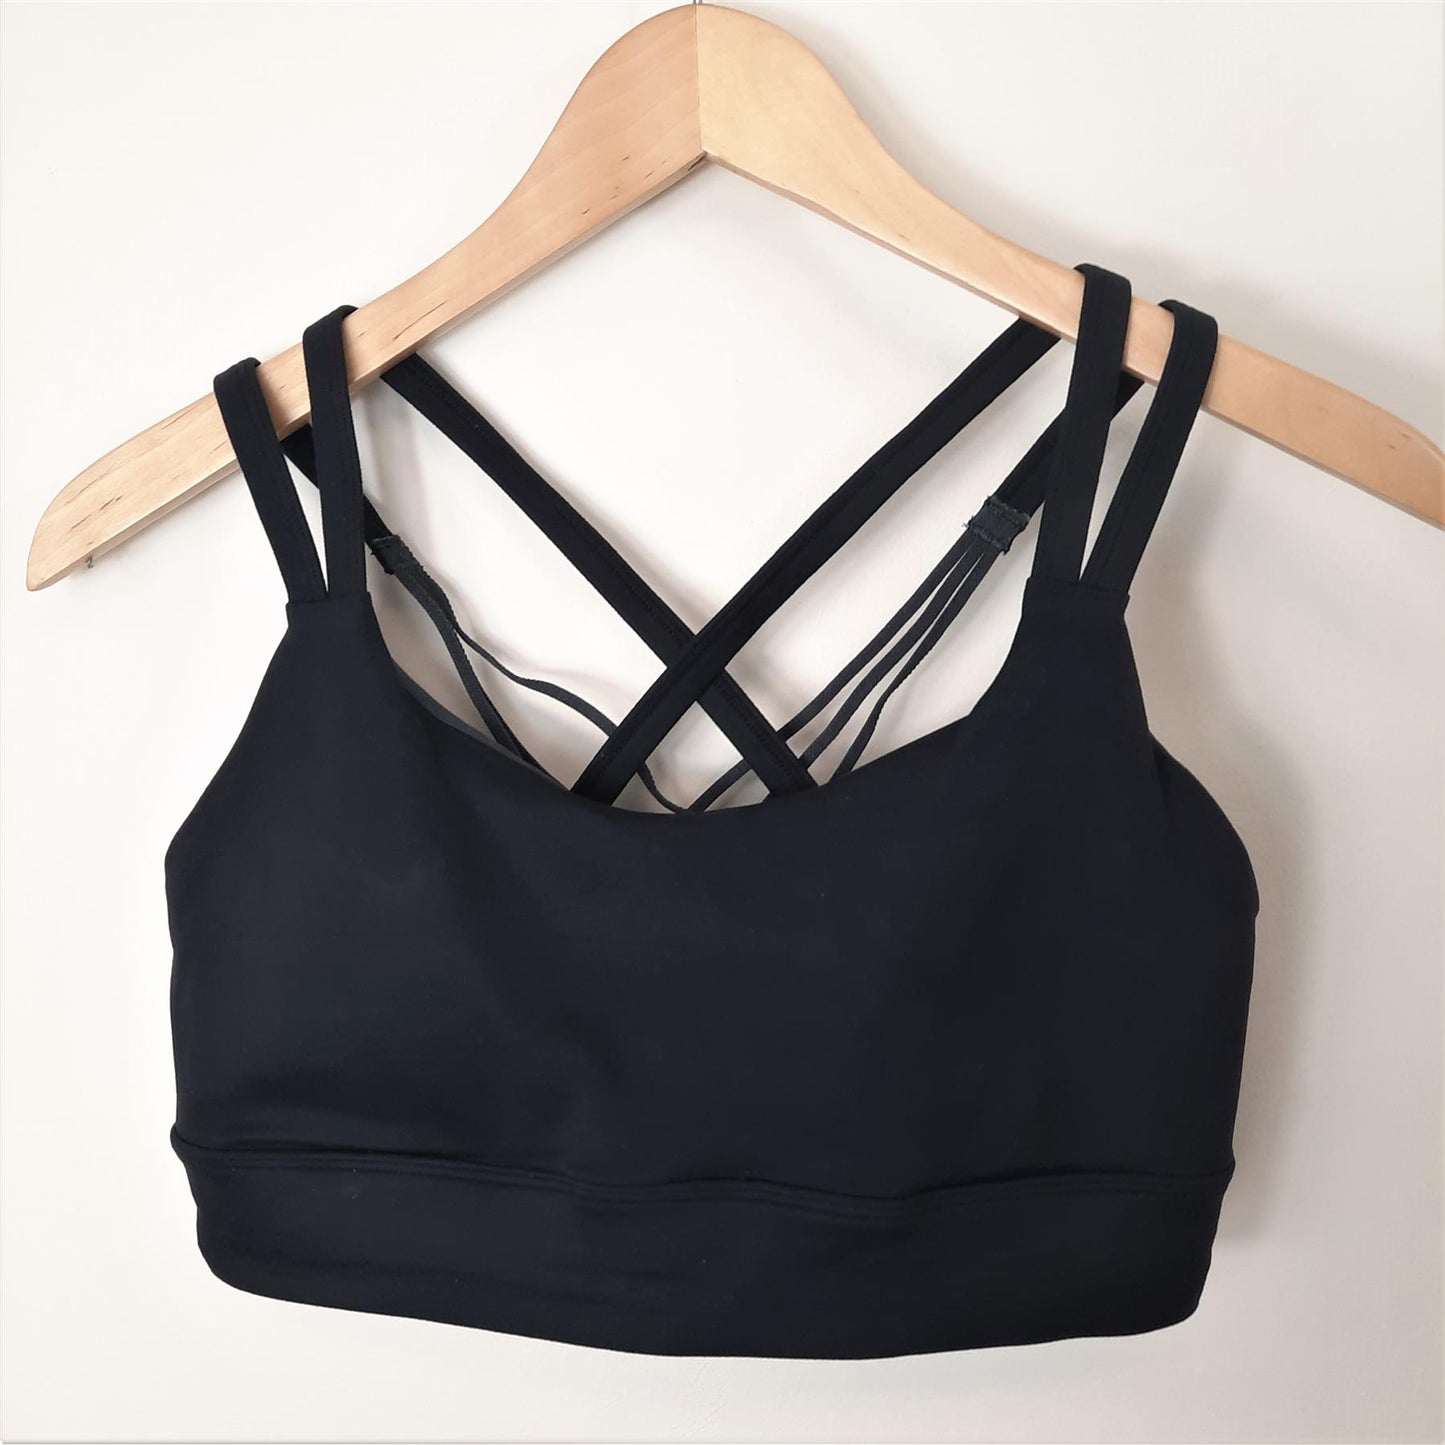 Sports Bra Non-Wired Removable Padding Strappy Back Soft Gym Top Freely Academy